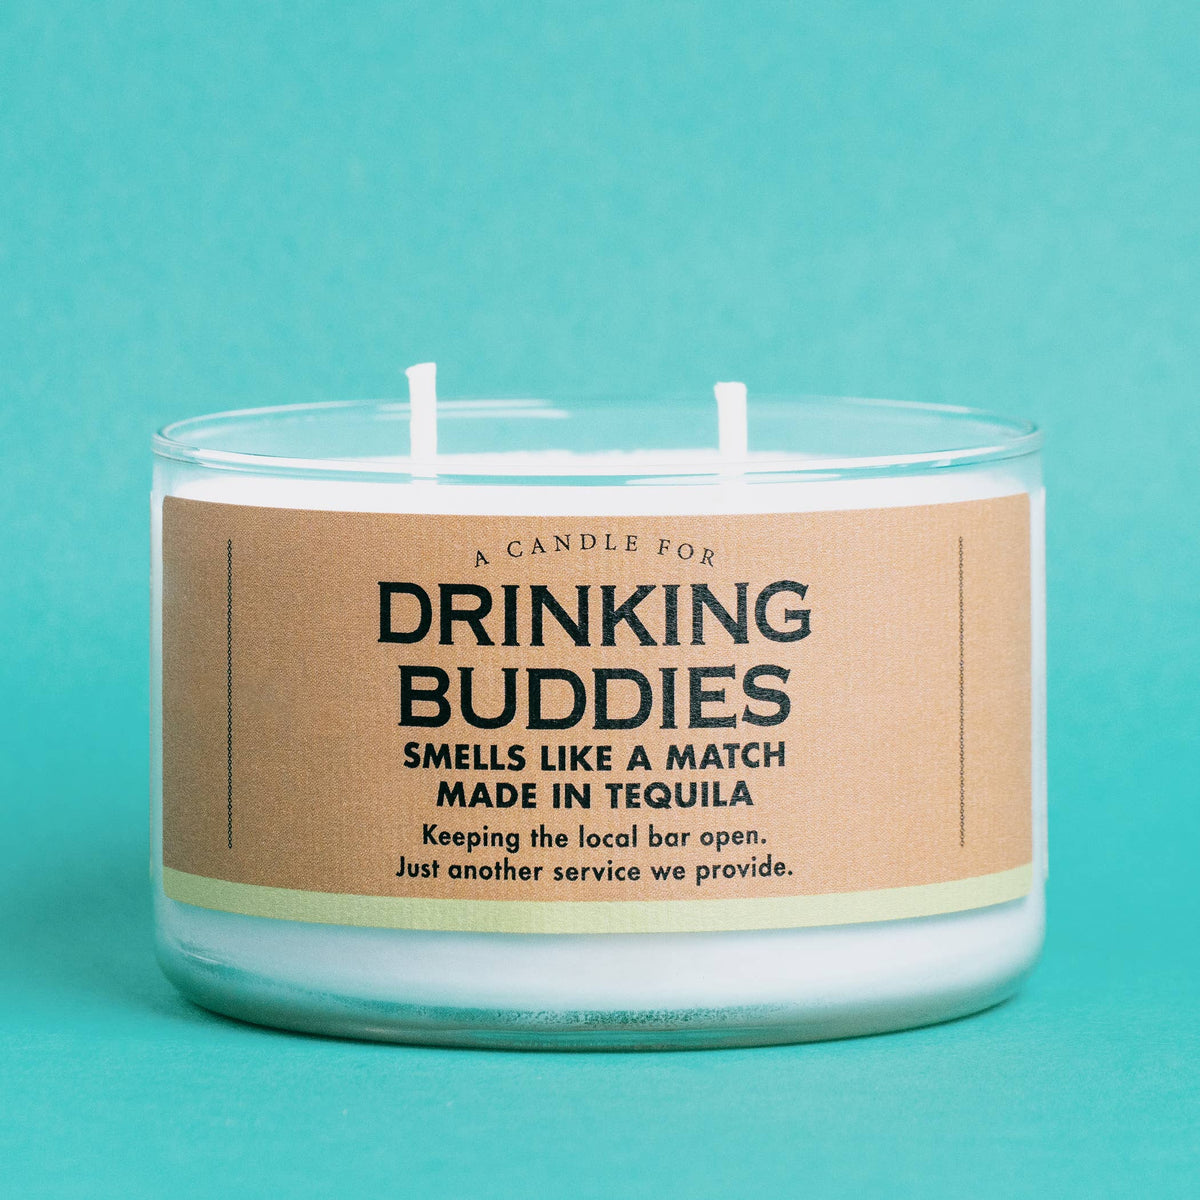 Whiskey River Soap Co. A Candle for Drinking Buddies | Funny Candle